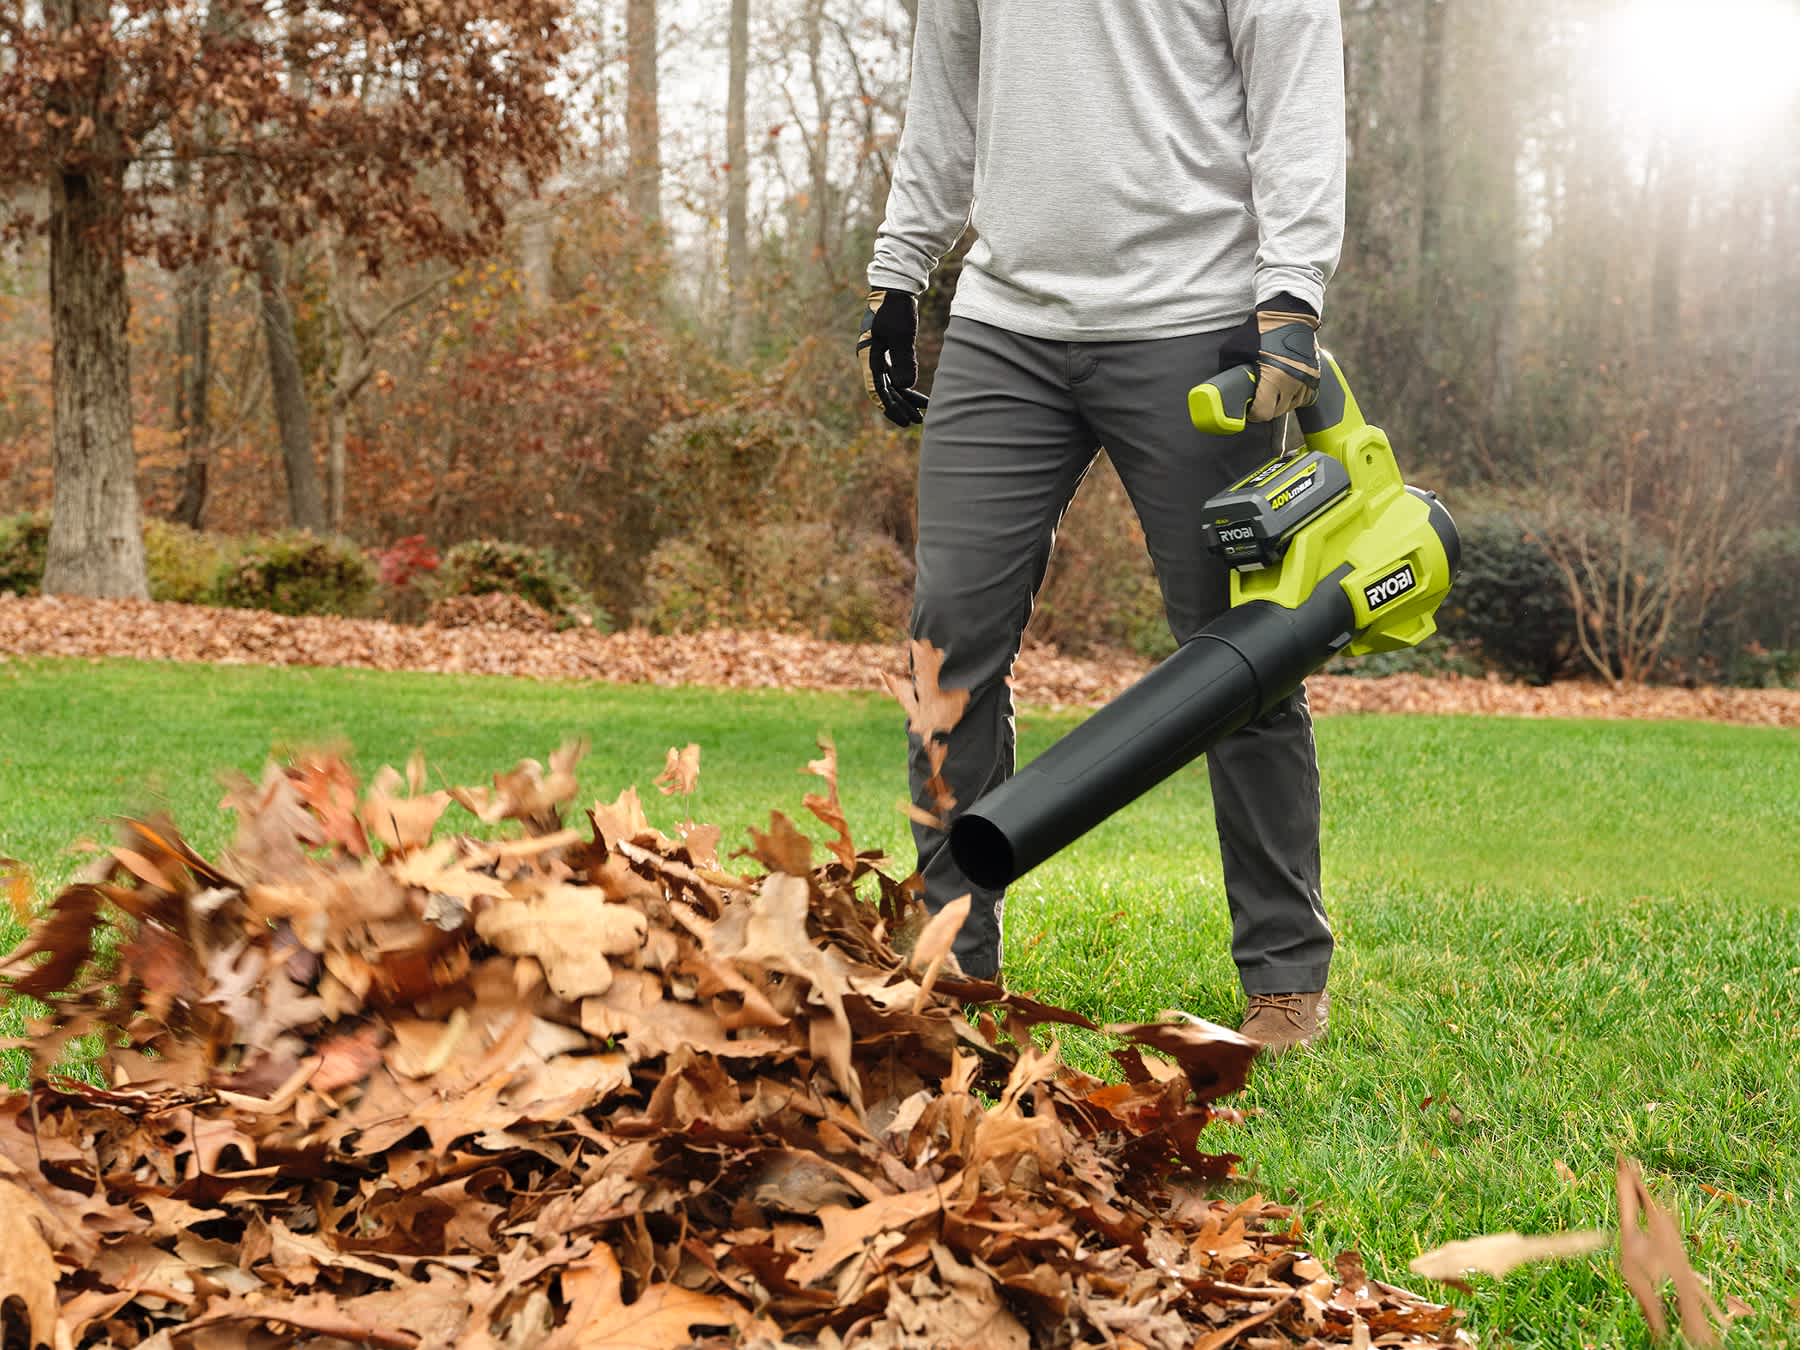 Product Features Image for 40V LITHIUM-ION CORDLESS 450 CFM AXIAL LEAF BLOWER (TOOL ONLY).